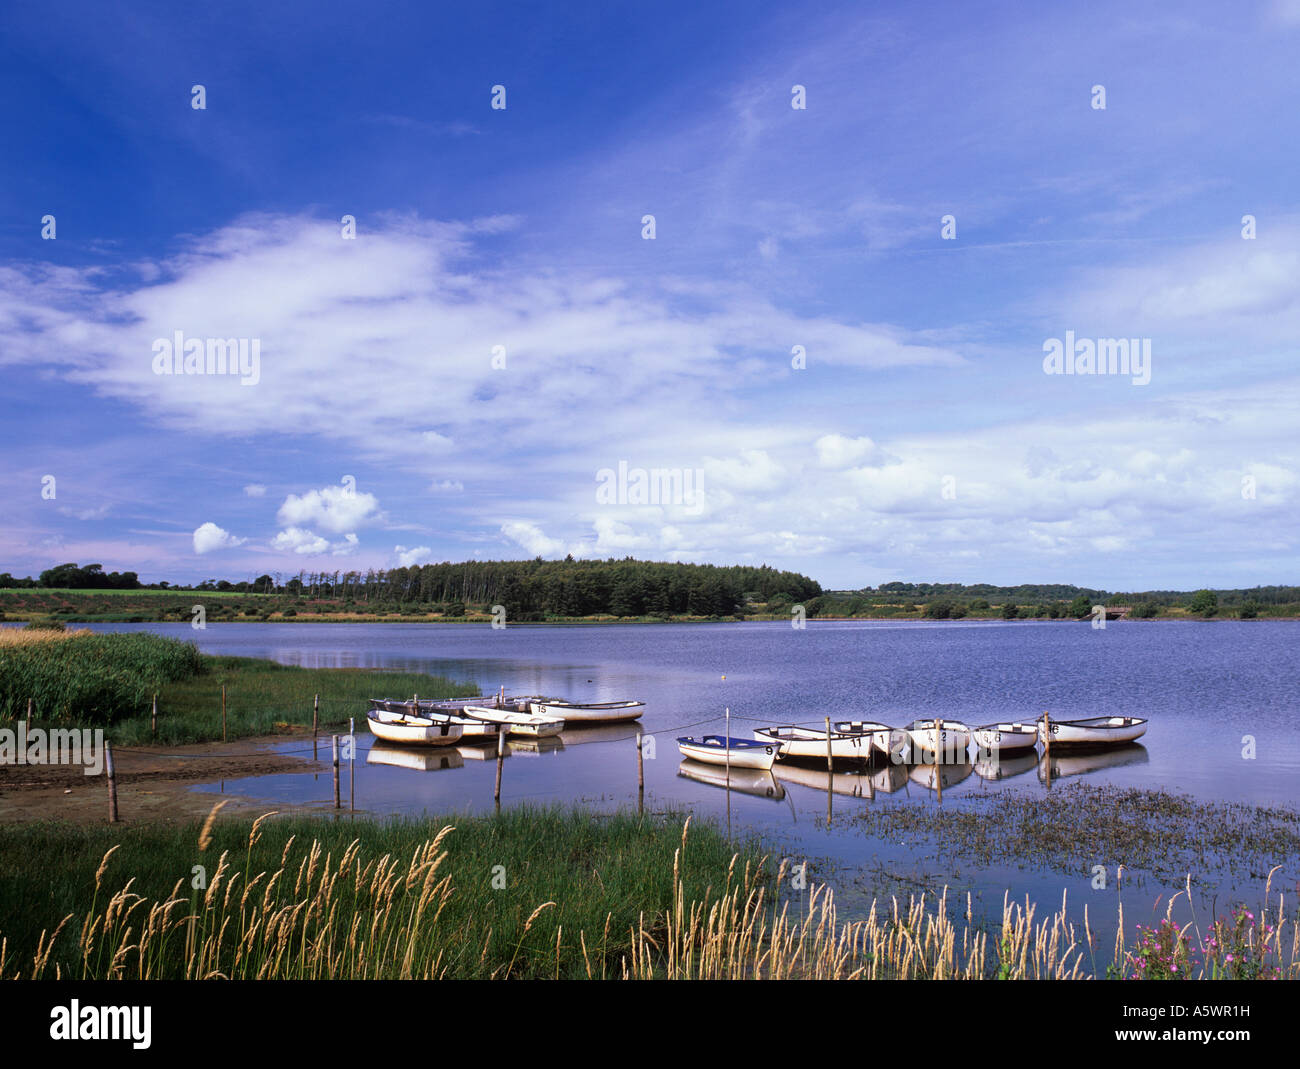 CEFNI RESERVOIR with moored boats used for fishing on the lake near Llangefni Isle of Anglesey Wales UK Britain Stock Photo